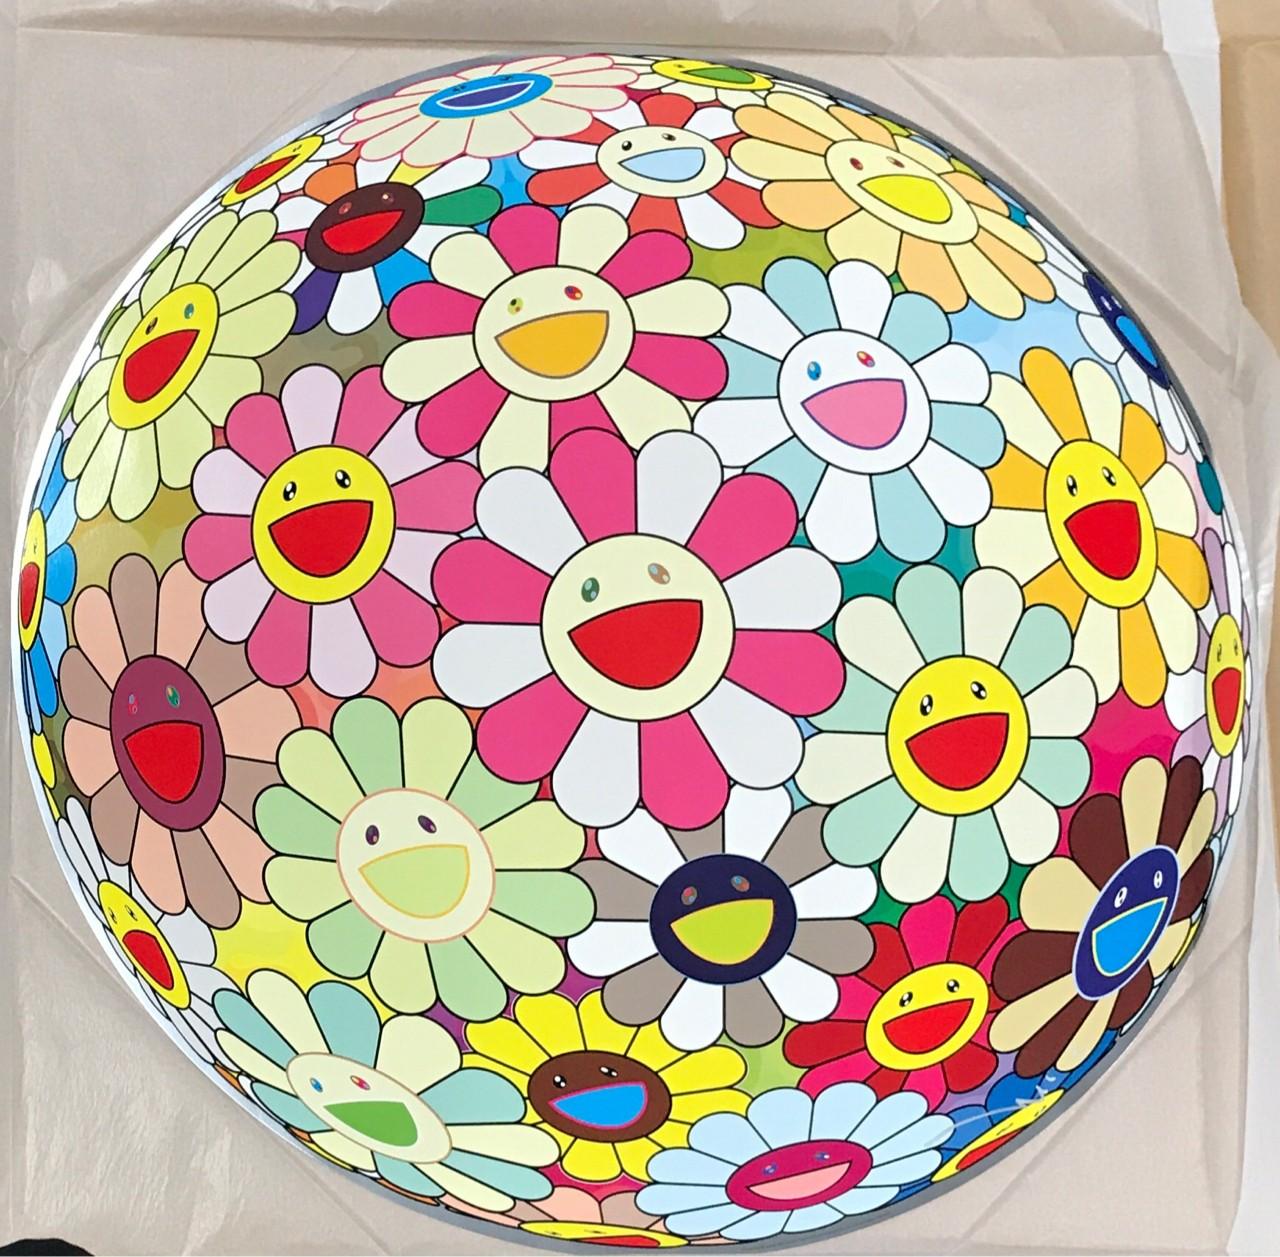 Flowerball Margareth (3D). Limited edition (print) by Murakami signed, numbered - Print by Takashi Murakami